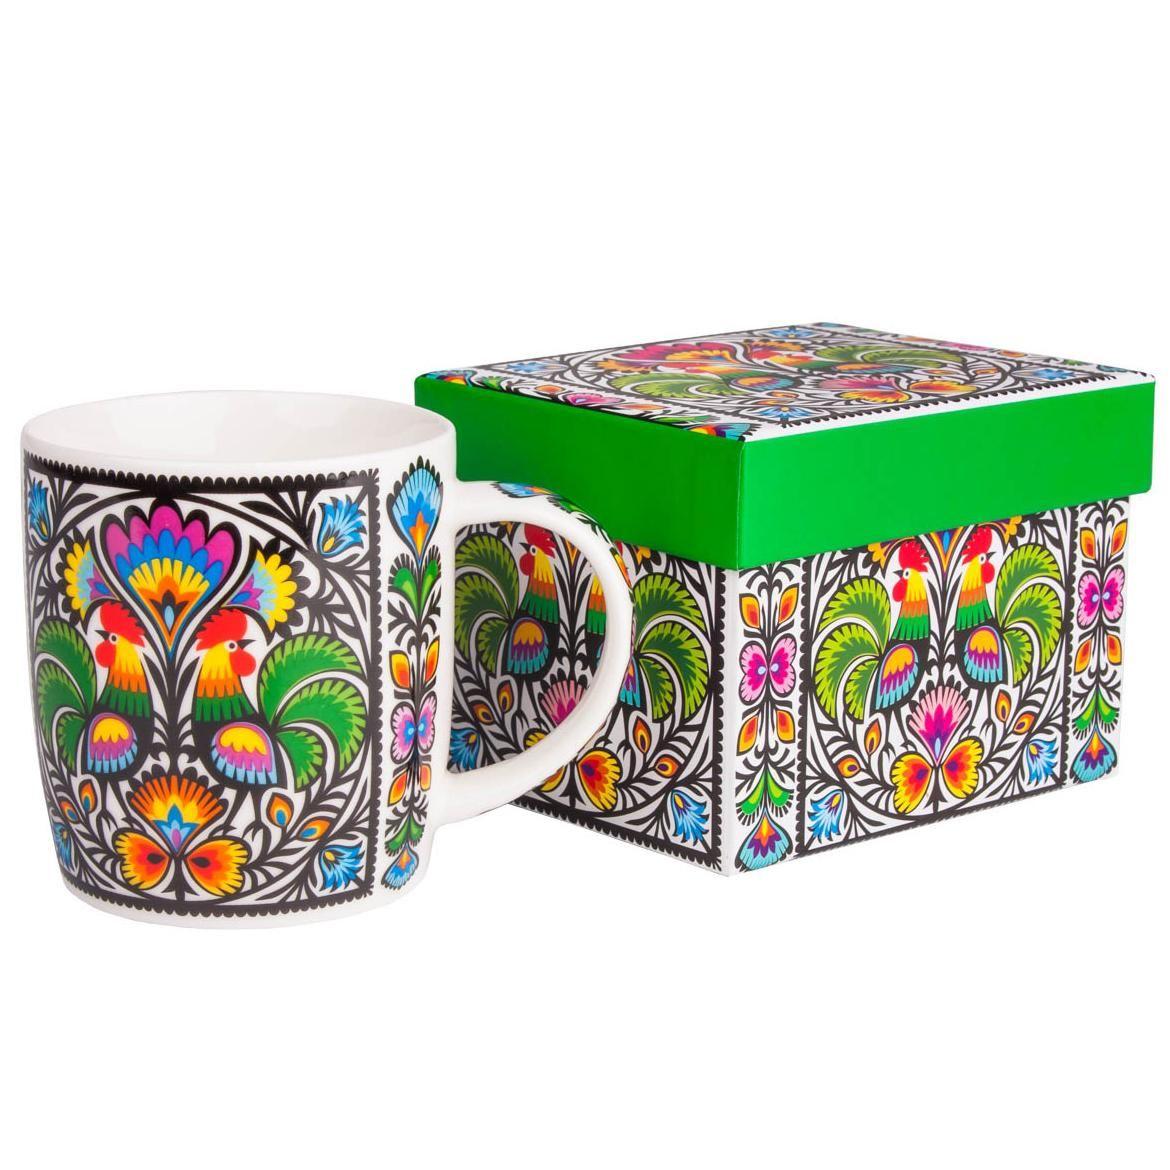 Hania FOLKSTAR mug in a box with roosters